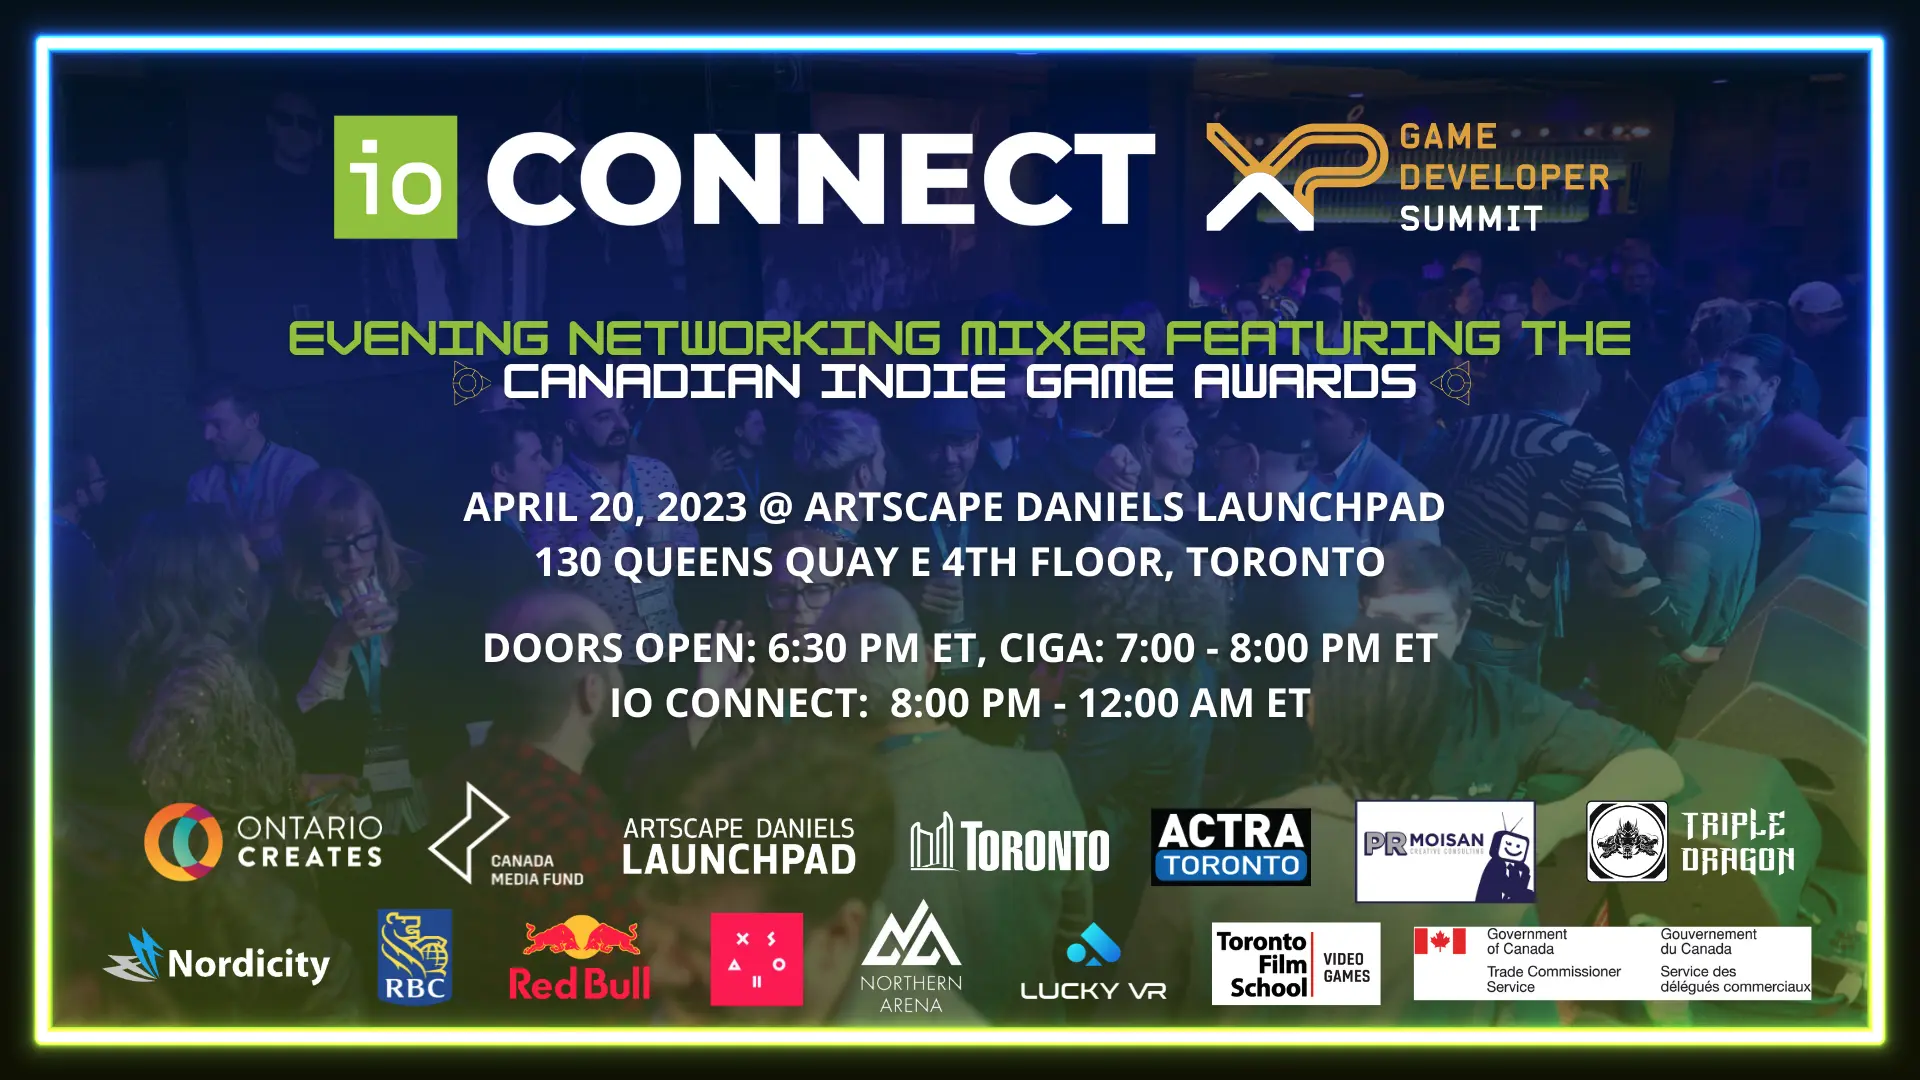 IO Connect & XP Game Developer Summit: Evening Networking Mixer Featuring the Canadian Indie Game Awards. April 20, 2023 at Artscape Daniels Launchpad 130 Queens Quay E 4th Floor, Toronto. Doors Open: 6:30PM ET. Canadian Indie Game Awards: 7:00 - 8:00 PM ET IO Connect: 8:00PM - 12:00 AM ET